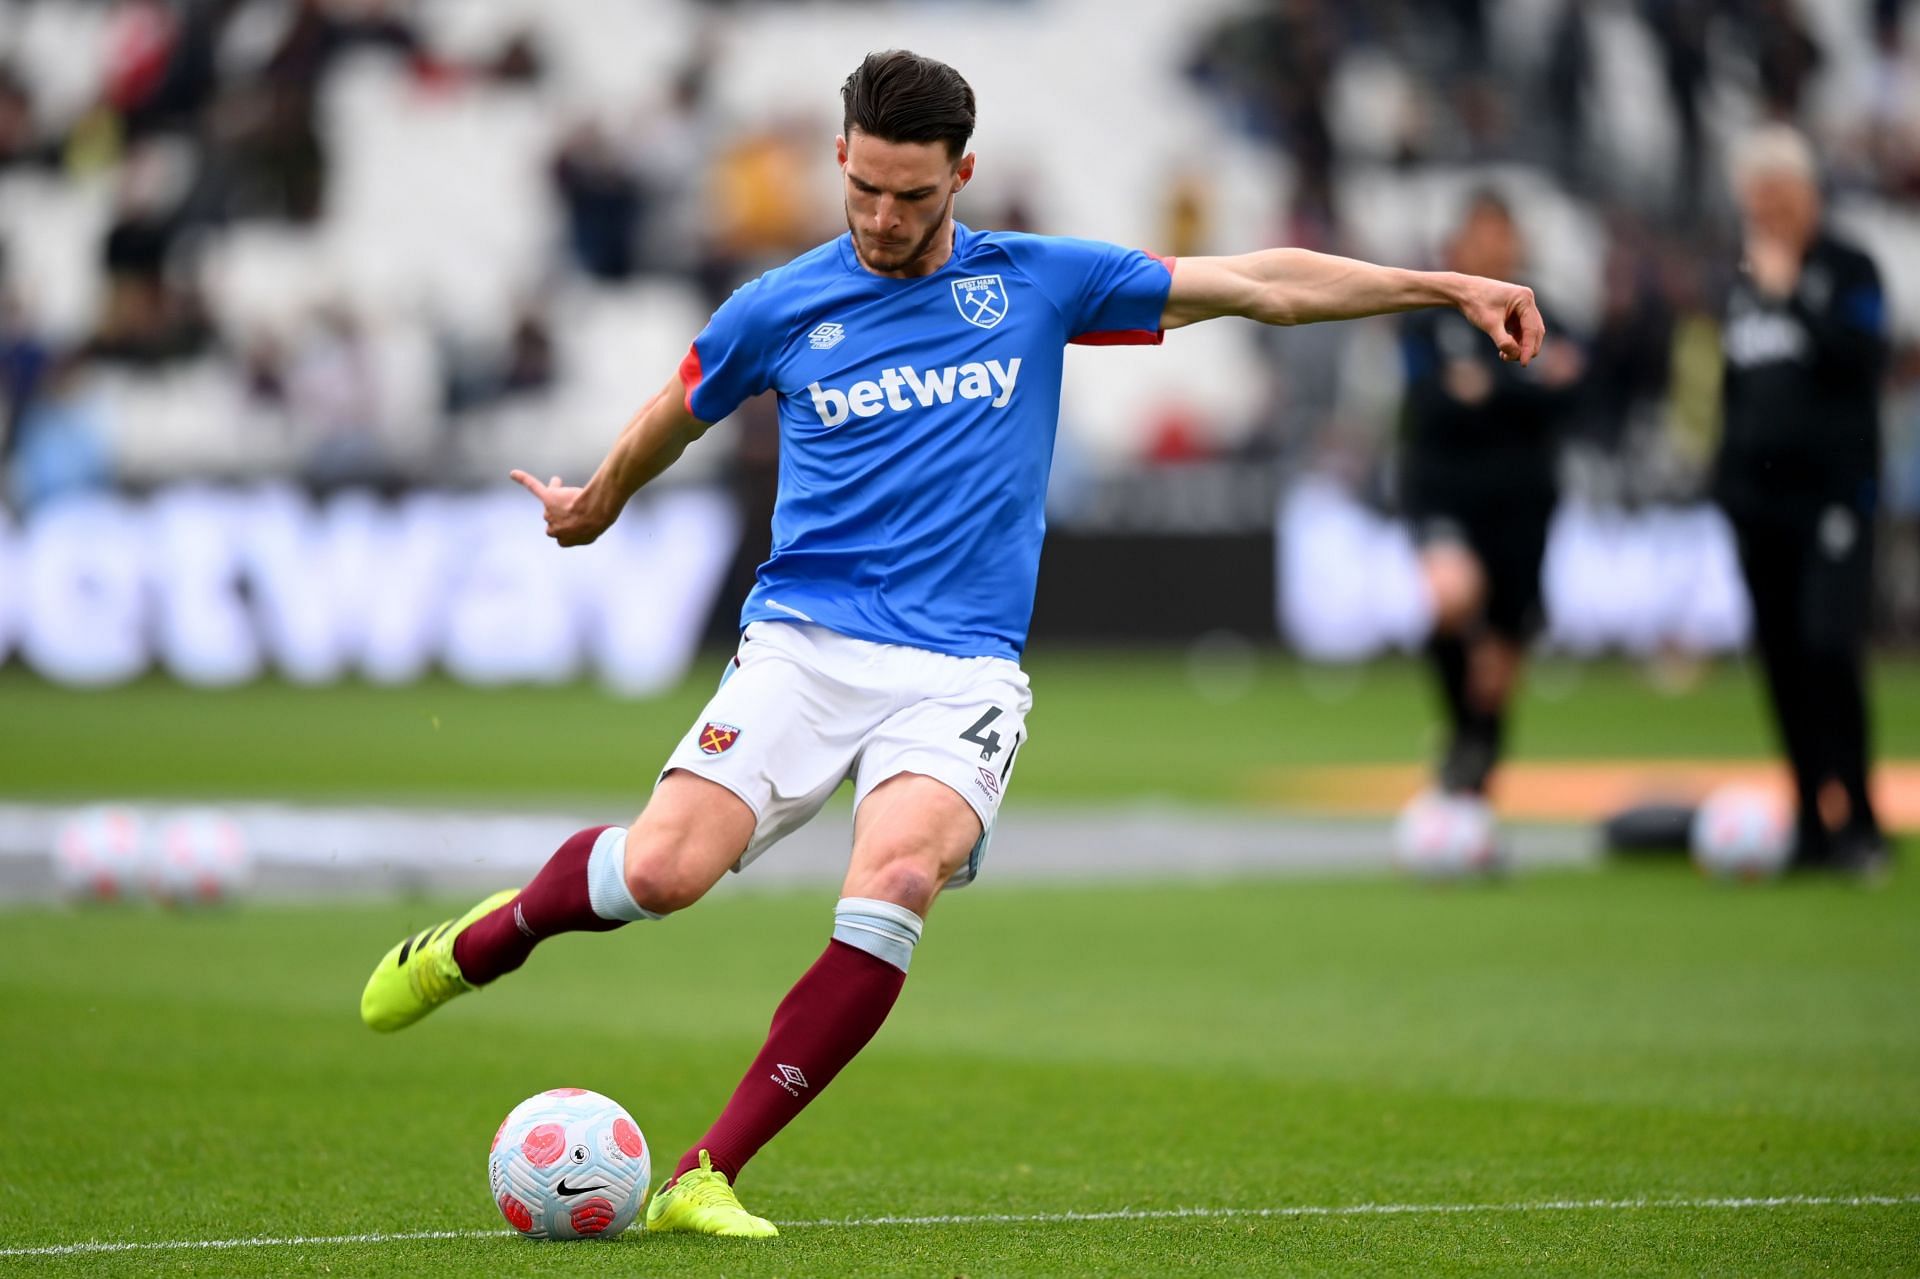 Declan Rice is highly sought after but is an expensive asset